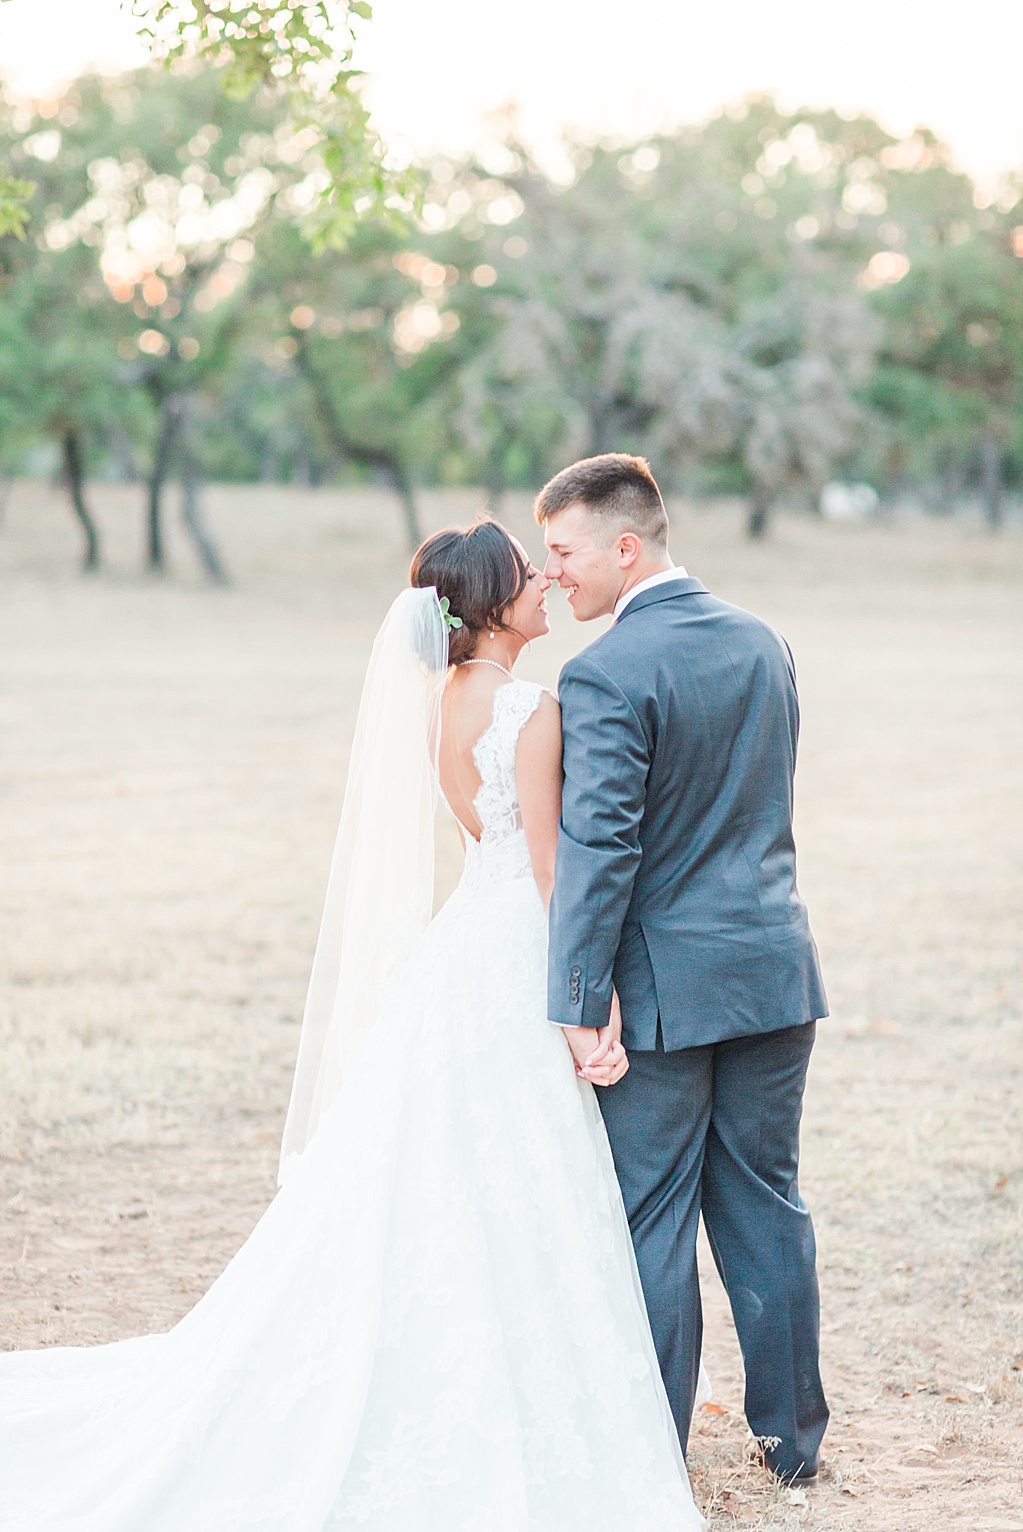 A lavender and ivory summer wedding at the lodge at country inn cottages in Fredericksburg tx by Allison Jeffers photography 0140